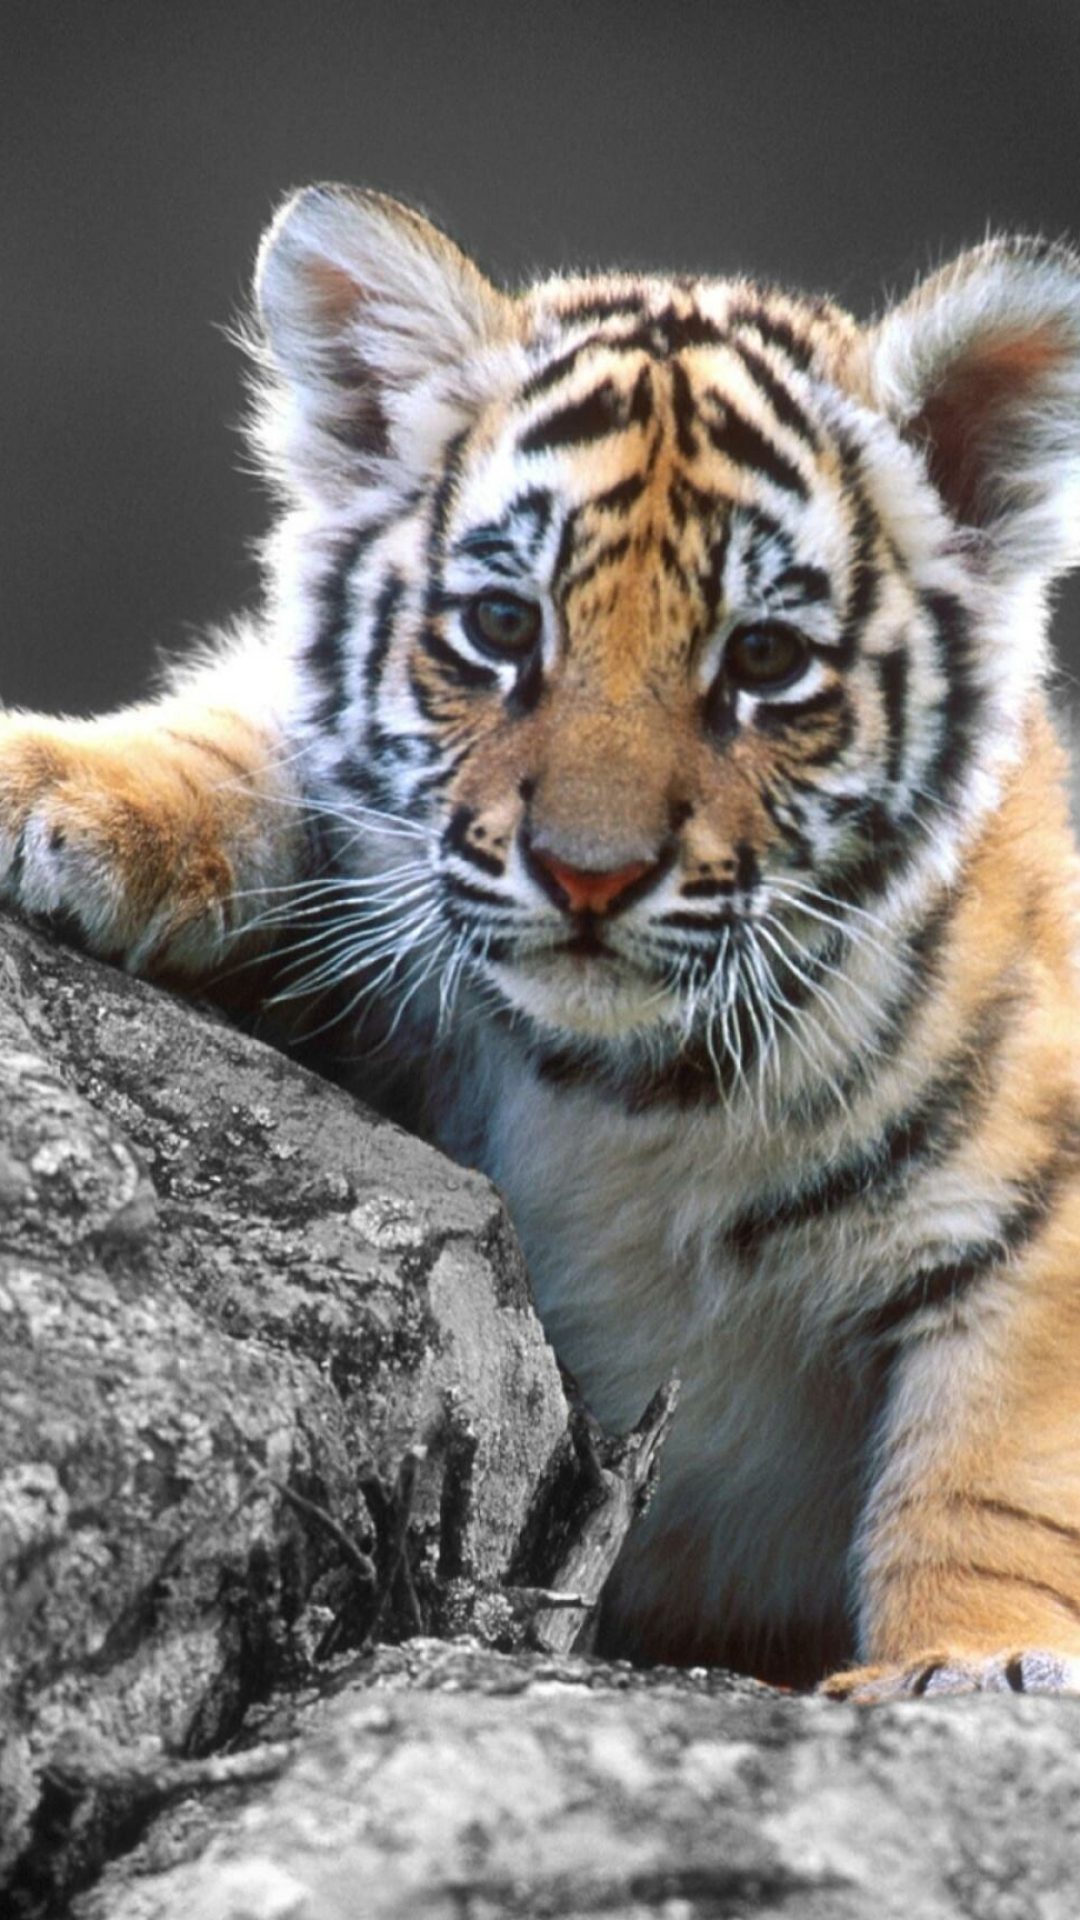 Tiger Cub: The baby of the reddish tan, striped great cat of forests, grasslands, and swamps. 1080x1920 Full HD Background.